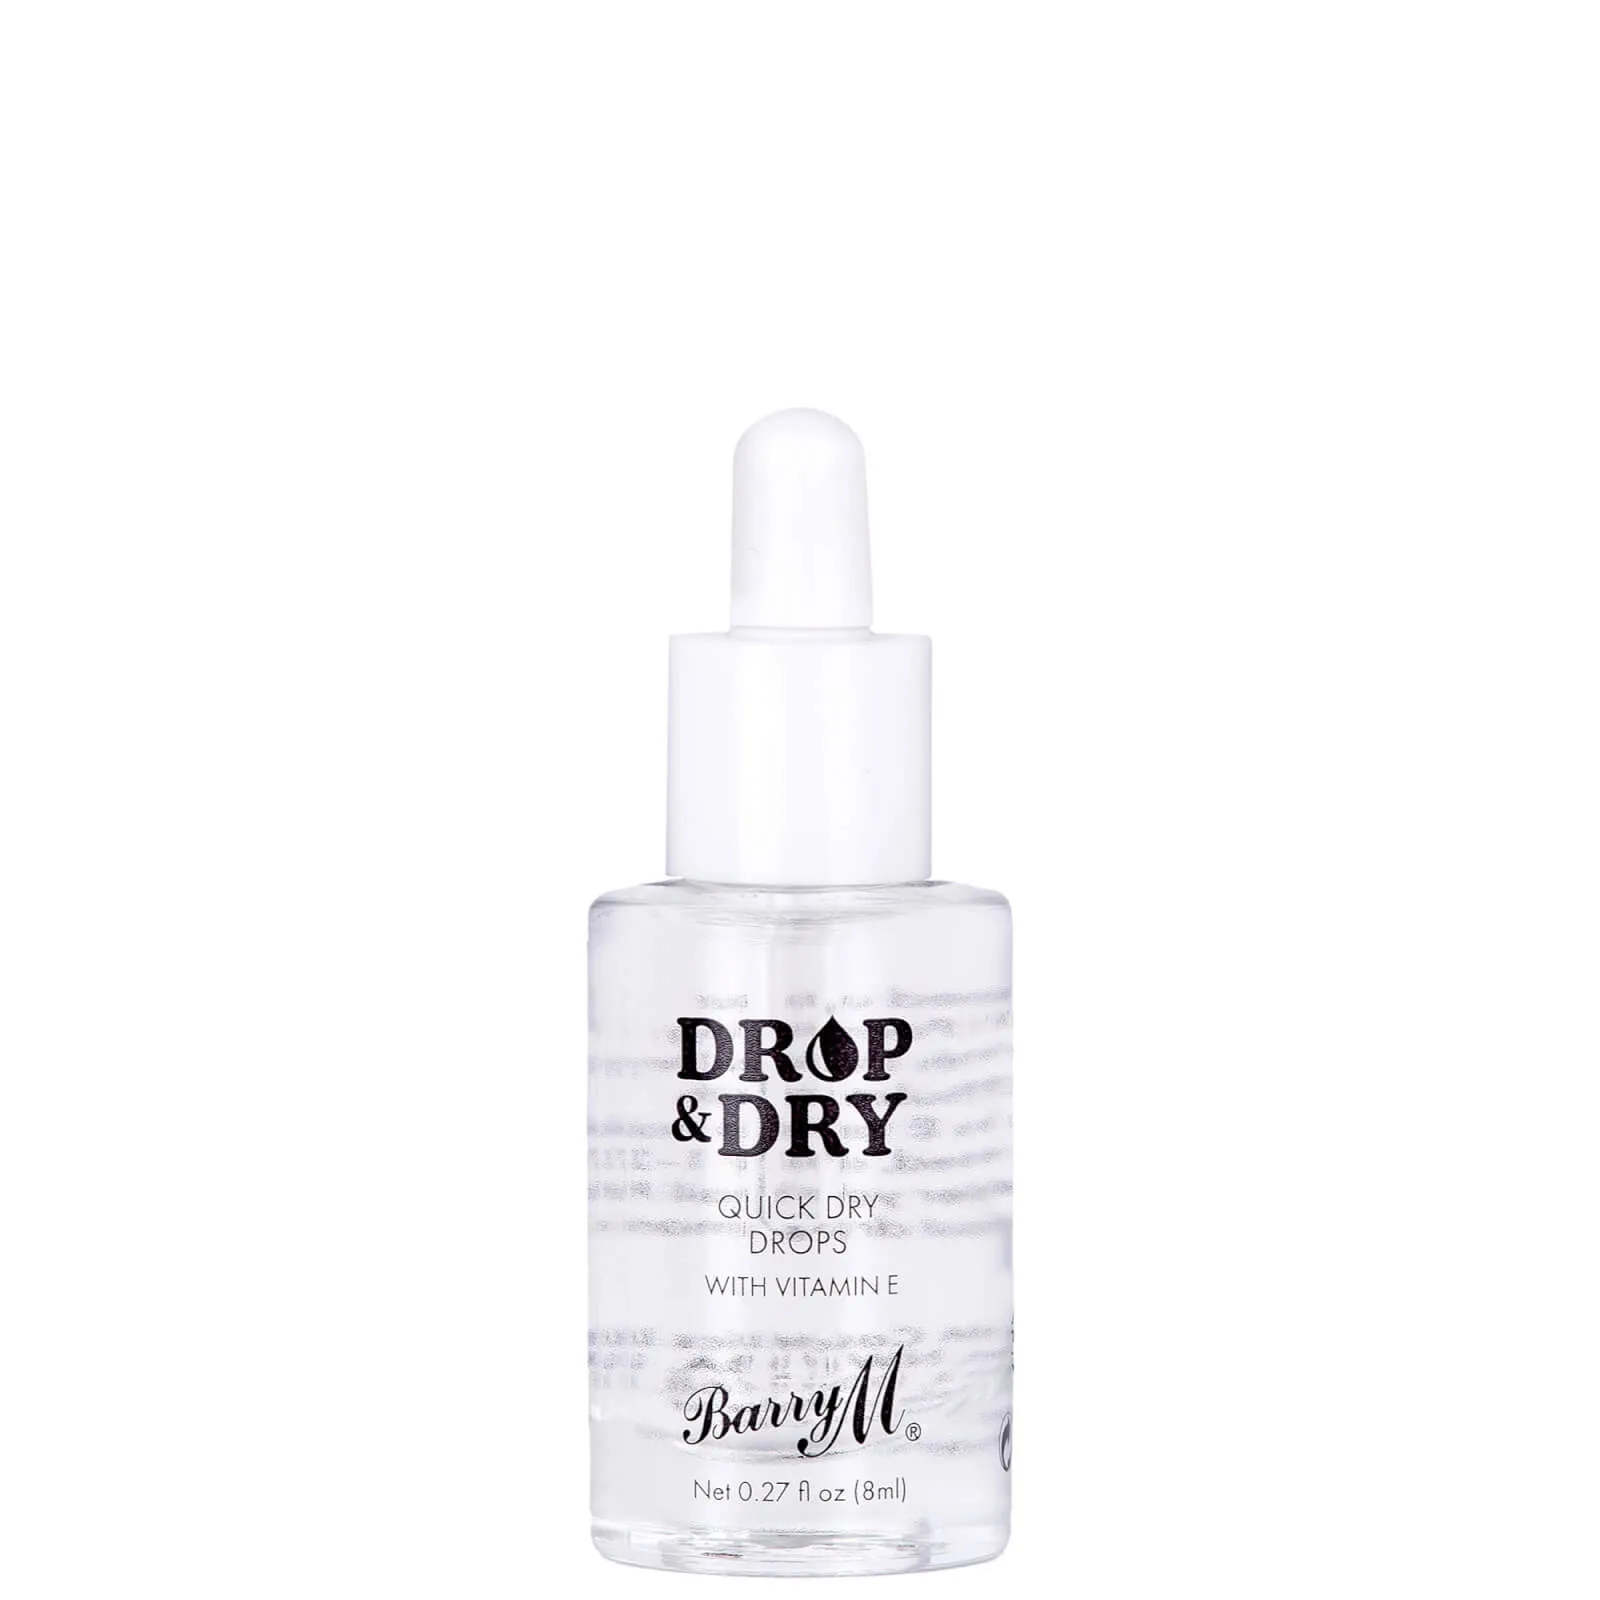  Drop and Dry Quick Dry Drops 8ml